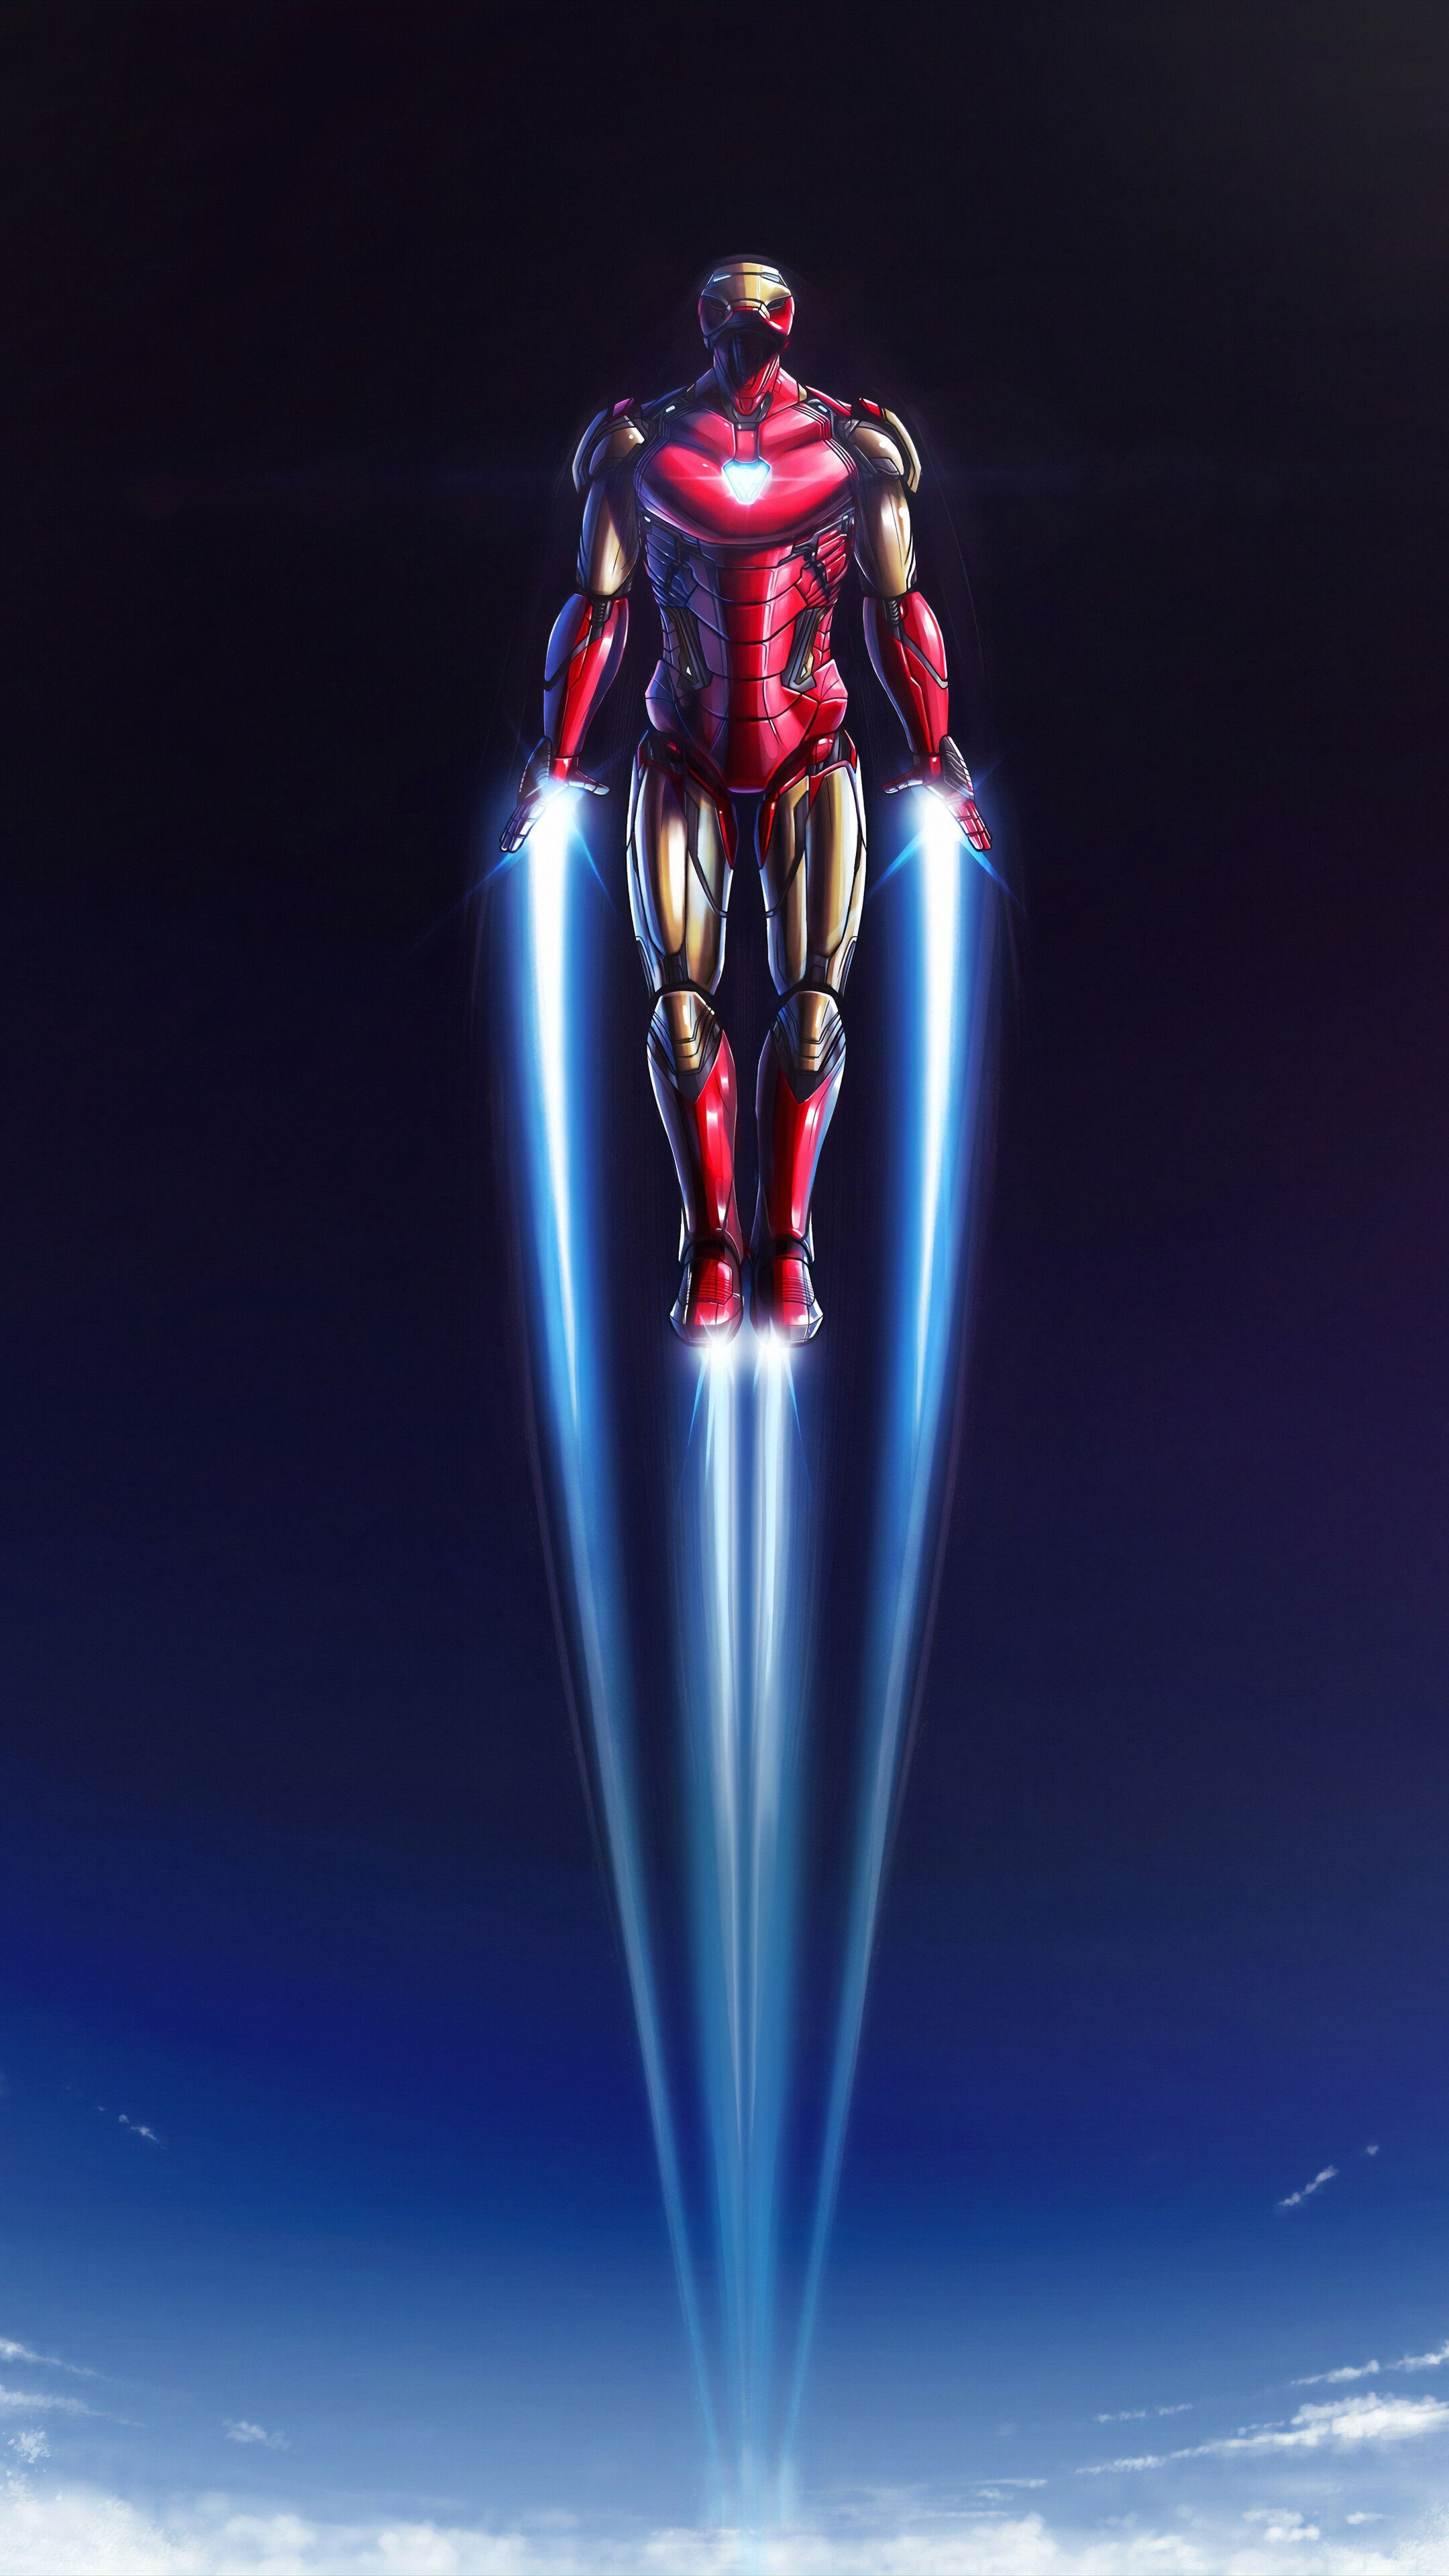 Iron Man 4K phone wallpapers, High-resolution, Vibrant colors, Exciting motifs, 2160x3840 4K Phone